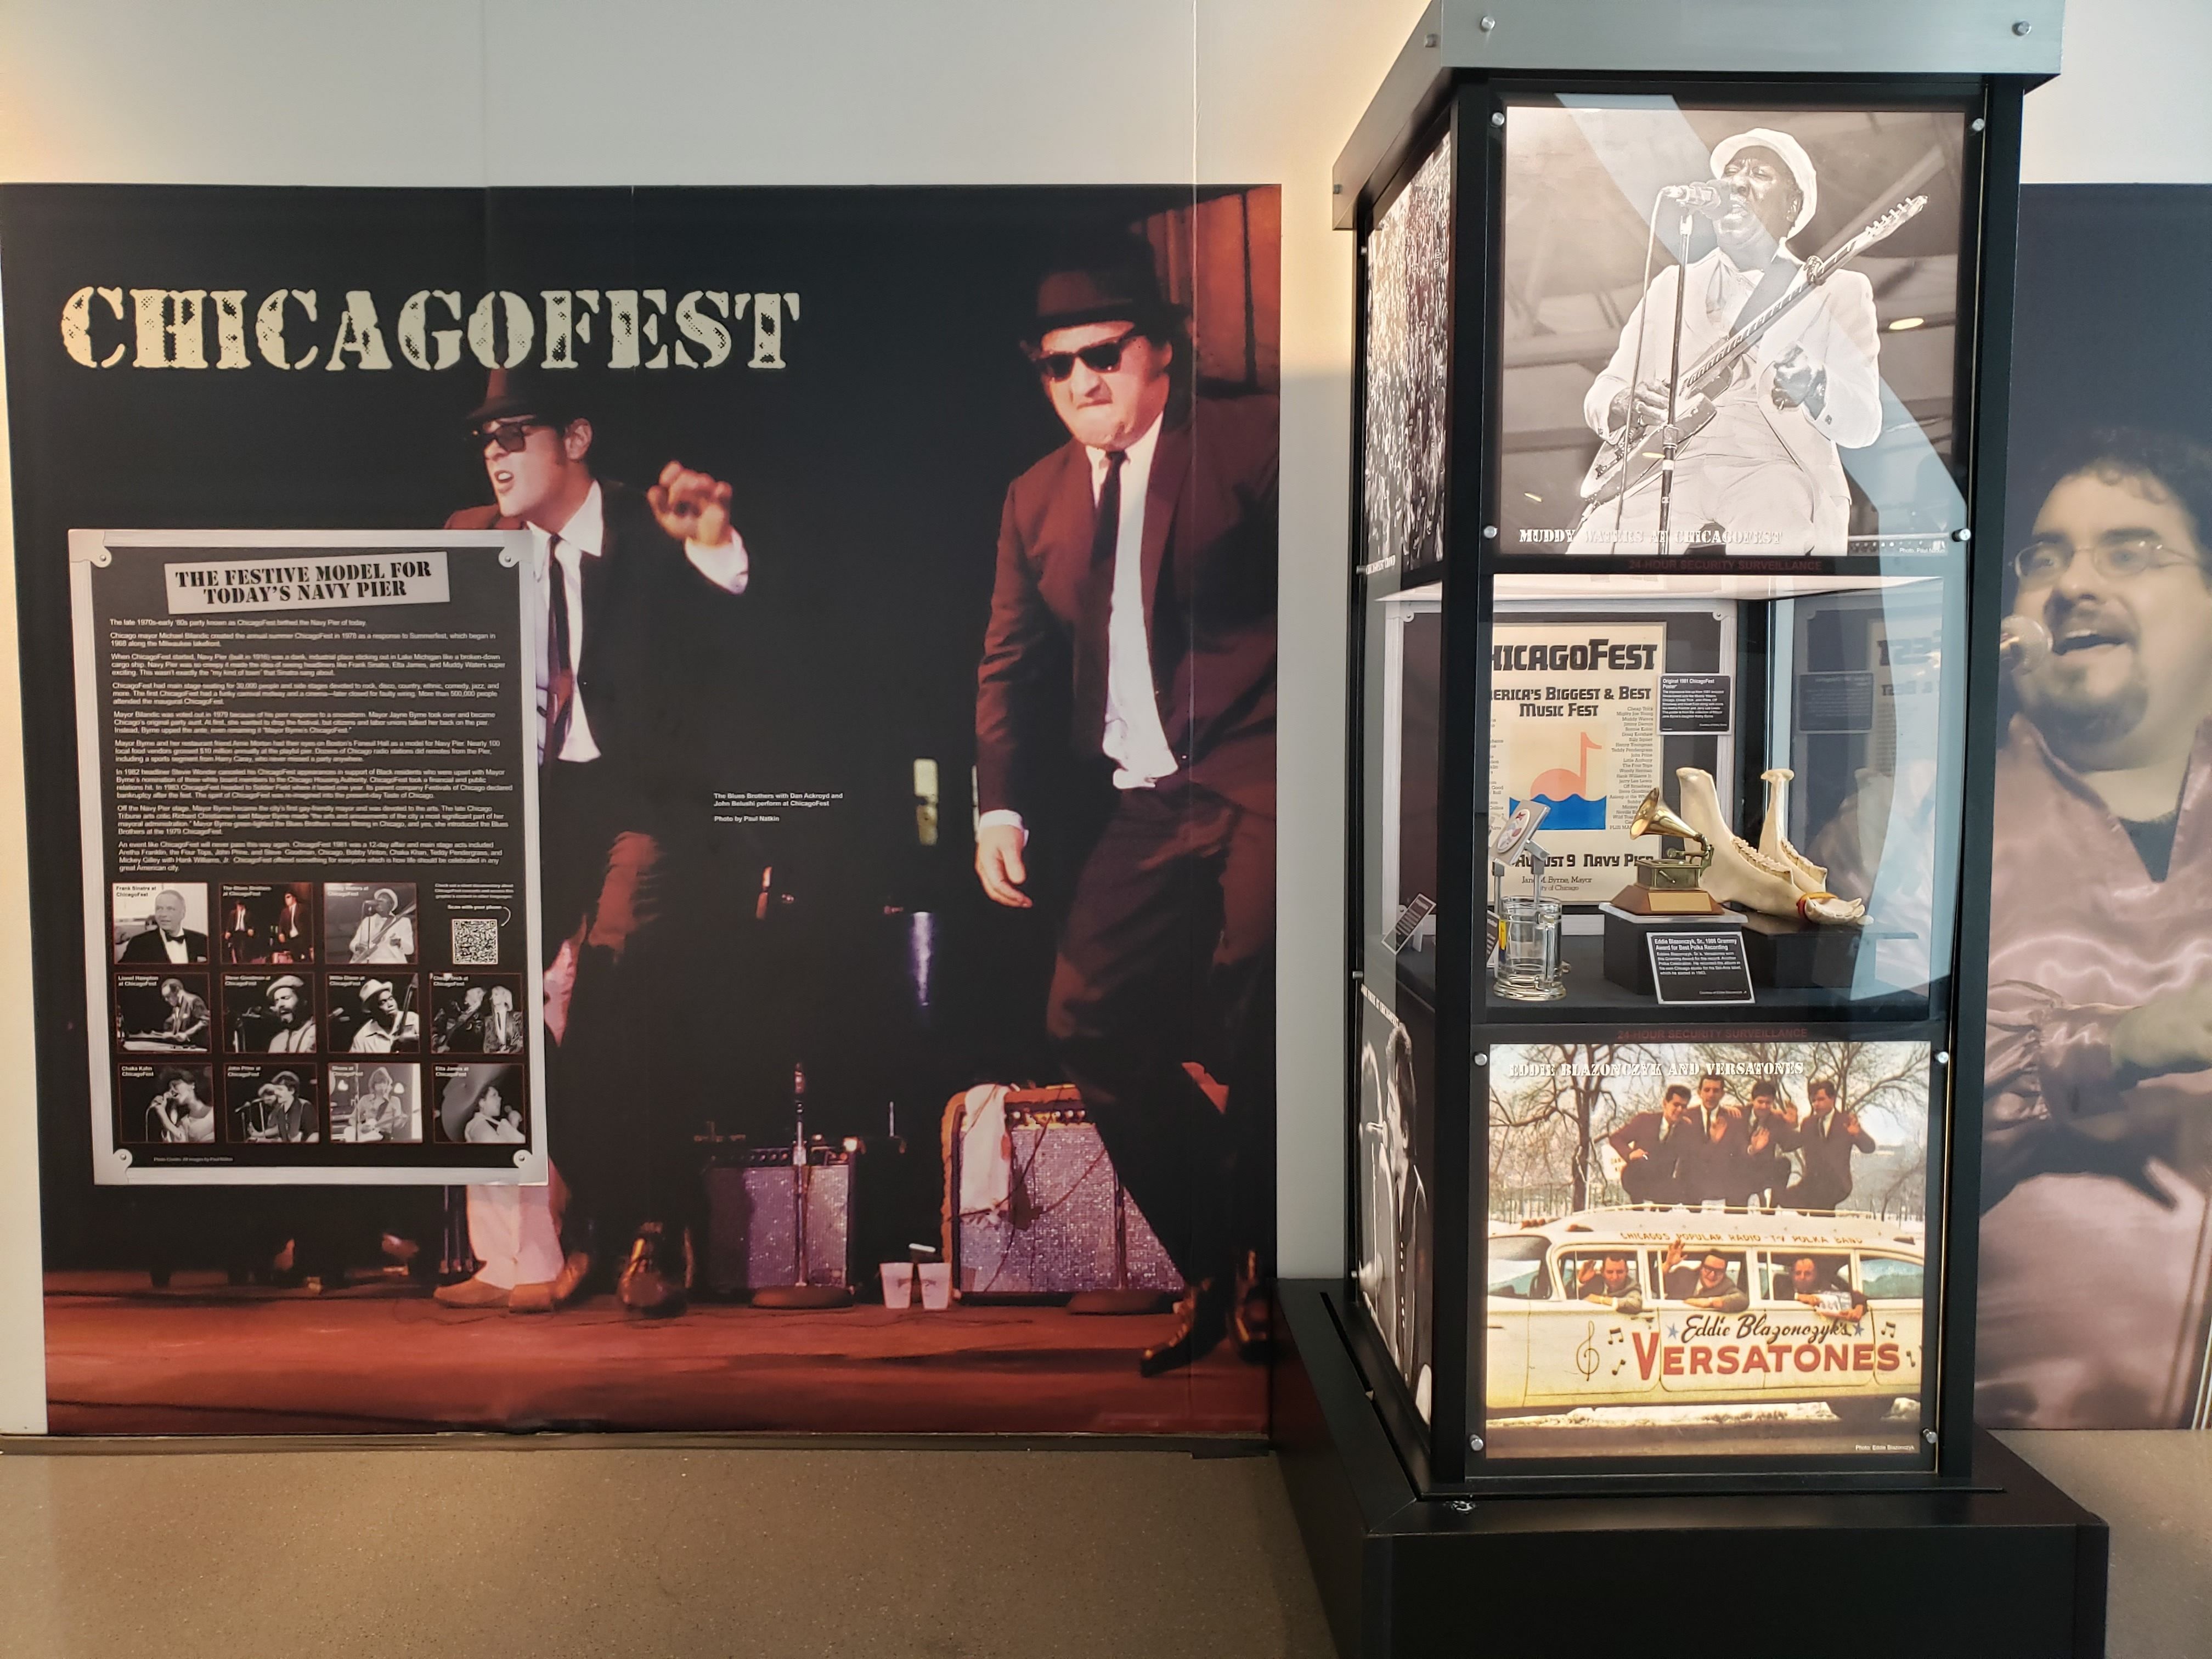 Blues Brothers on a "Chicago Fest" poster